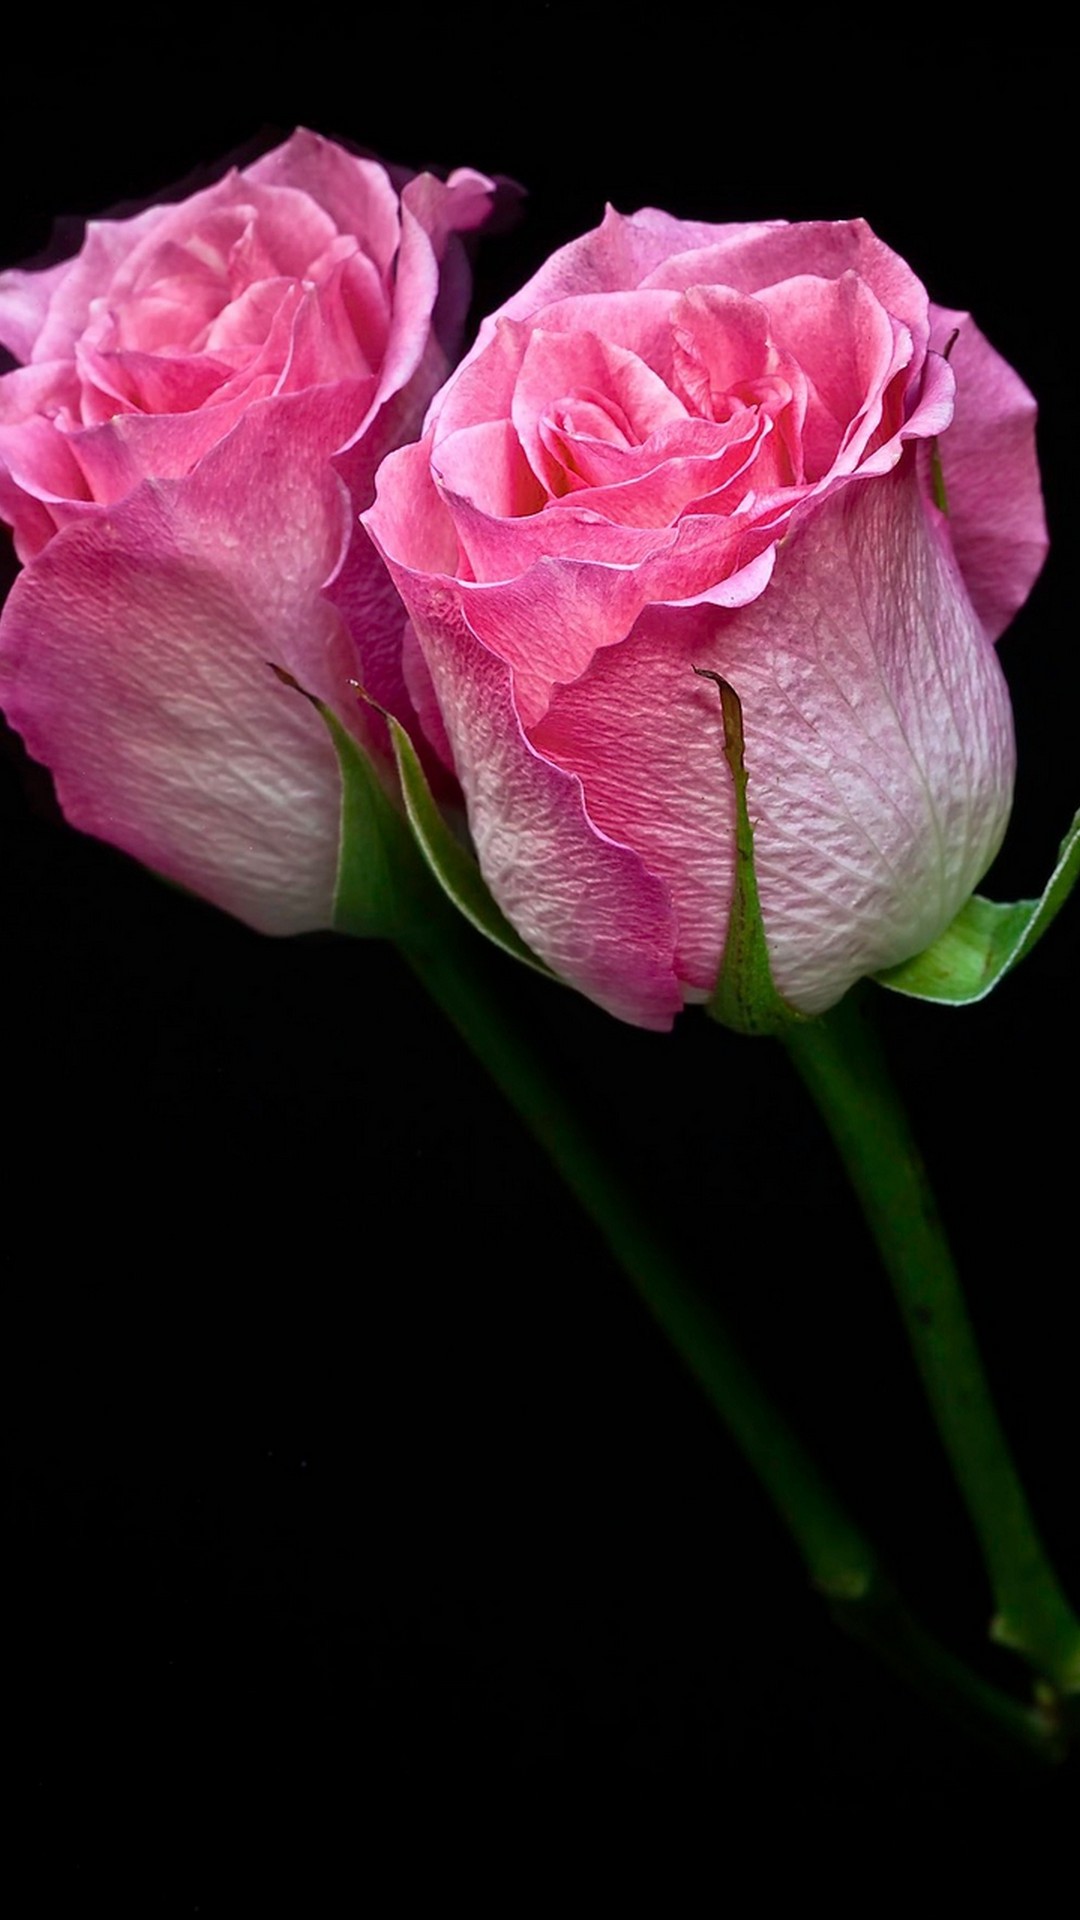 Pink Flower Wallpaper For Mobile Android | 2021 Cute ...